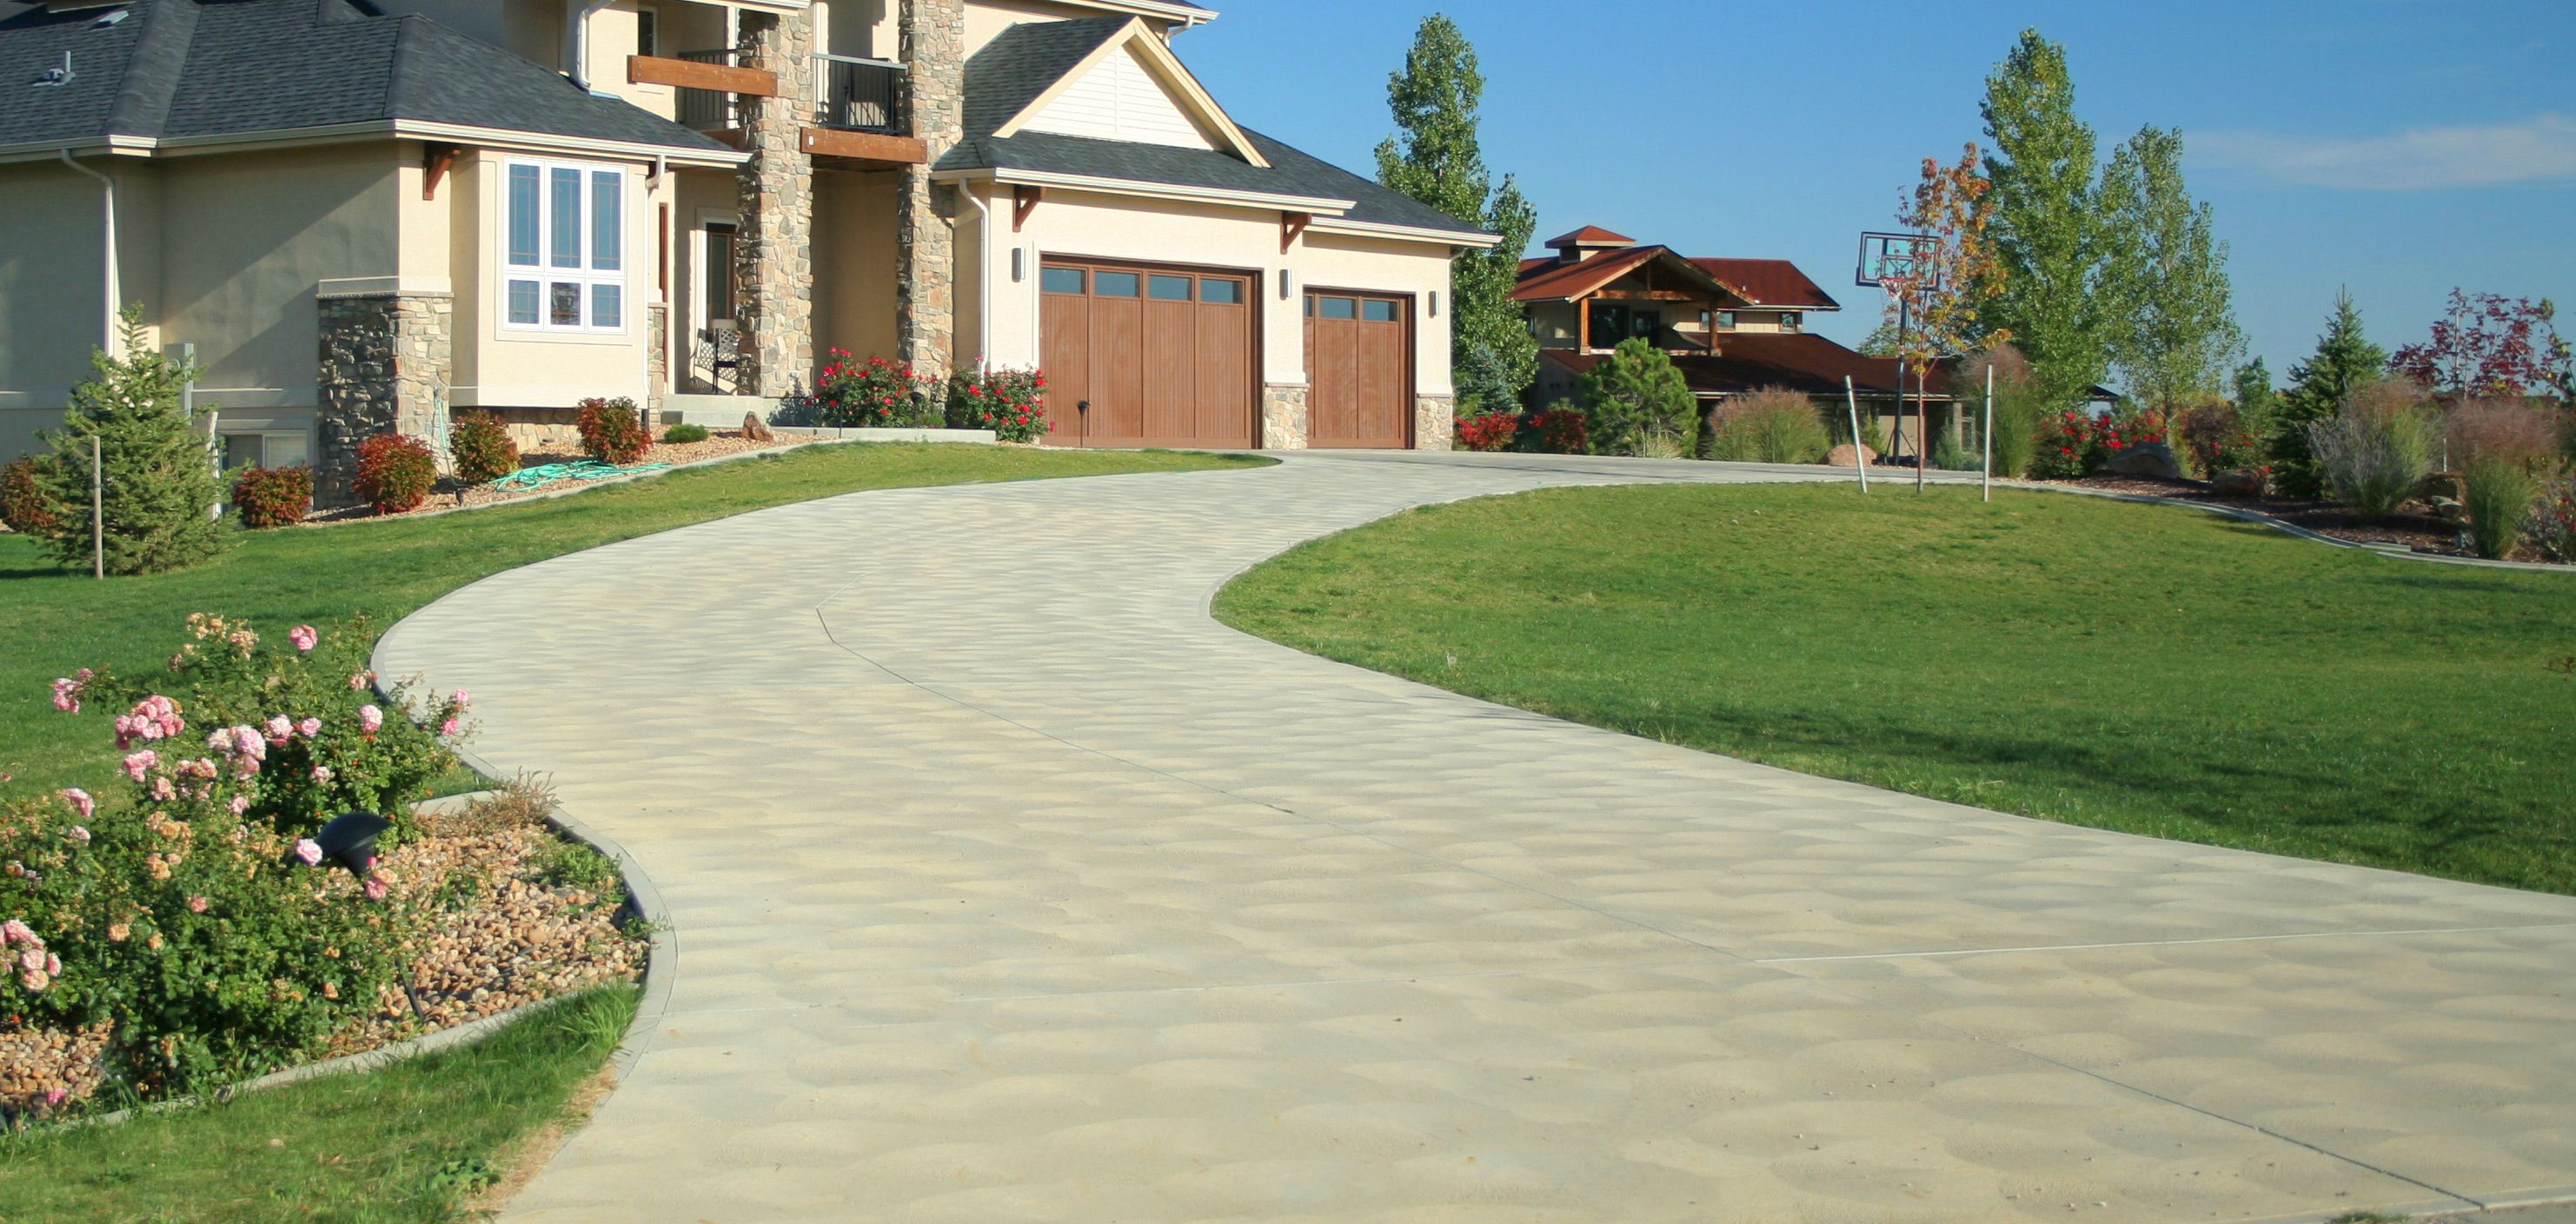 Earning One’s Bread And Butter Through Driveway Installation Contracts